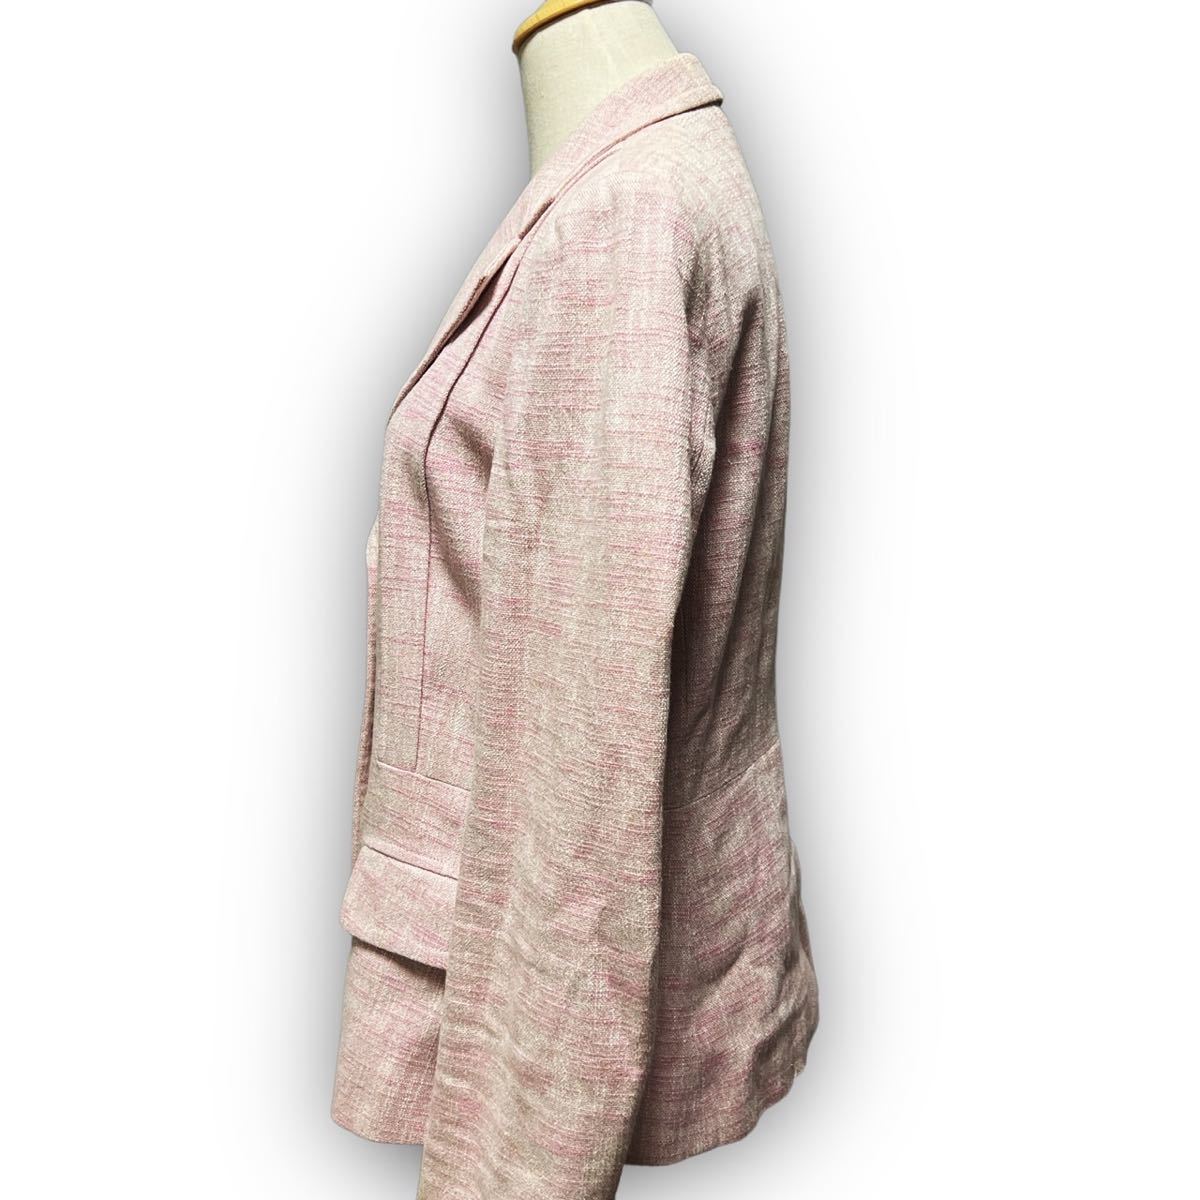 Y298* popular brand *MaxMara Max Mara tailored jacket white tag cotton adult pretty L size corresponding Pink Lady -s on goods 